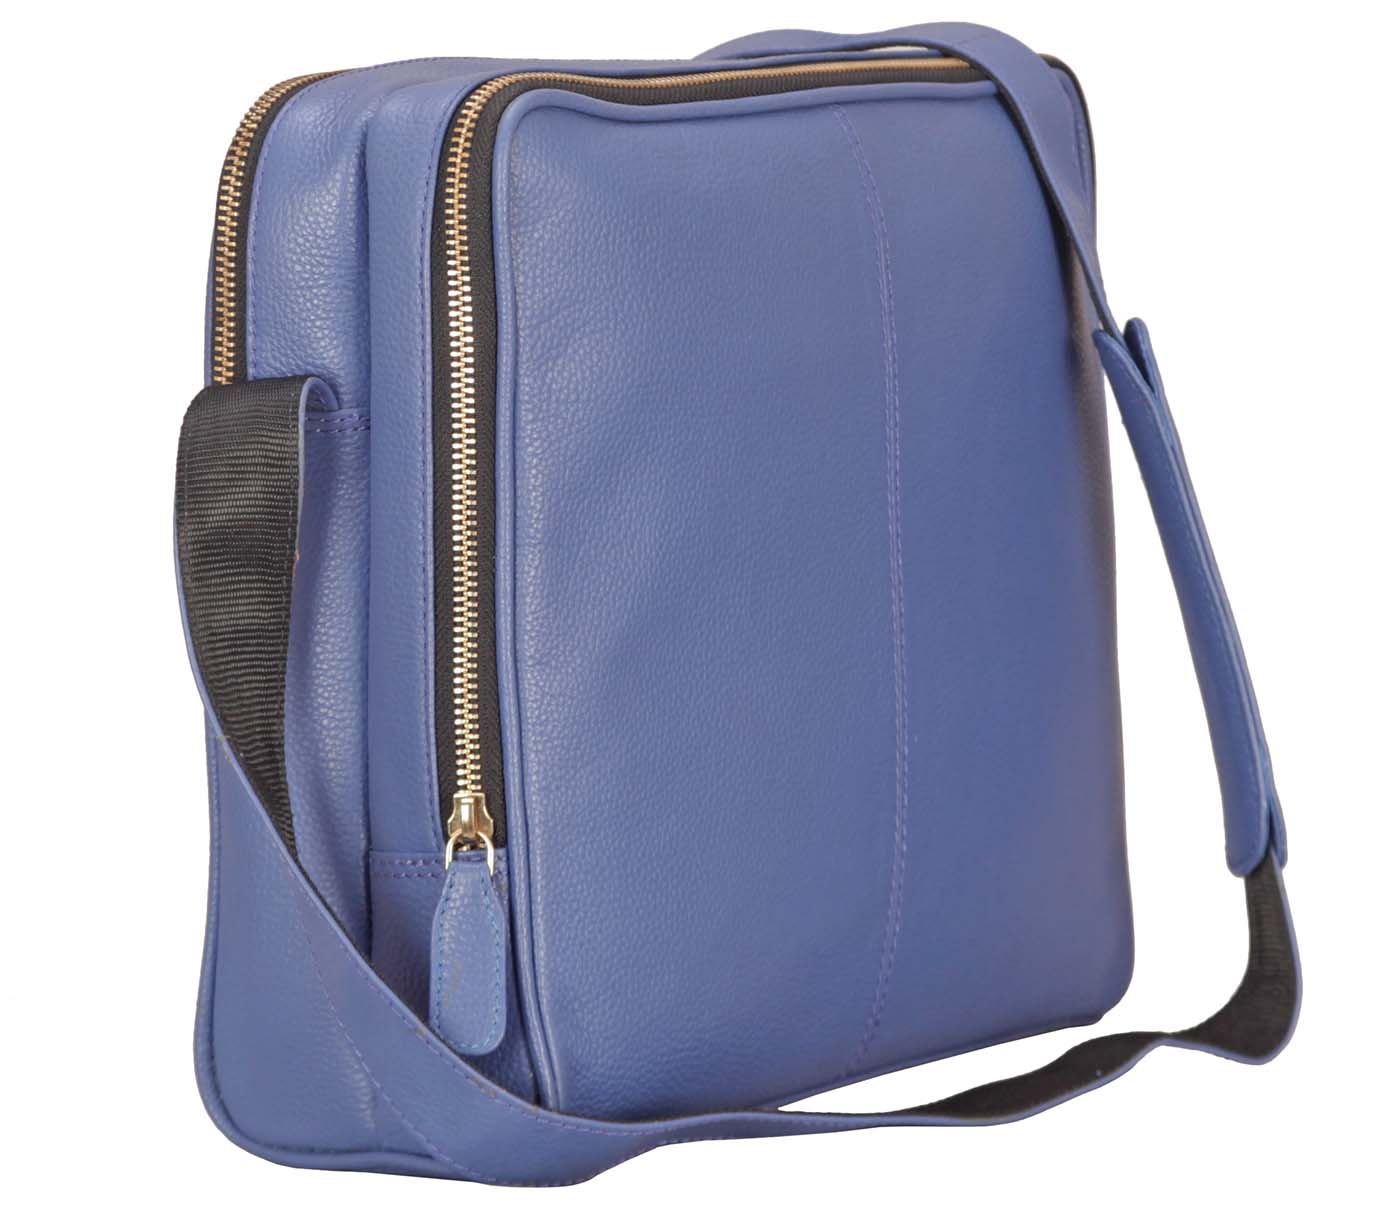 P37-Dwayne-Men's travel pouch in Genuine Leather - Blue